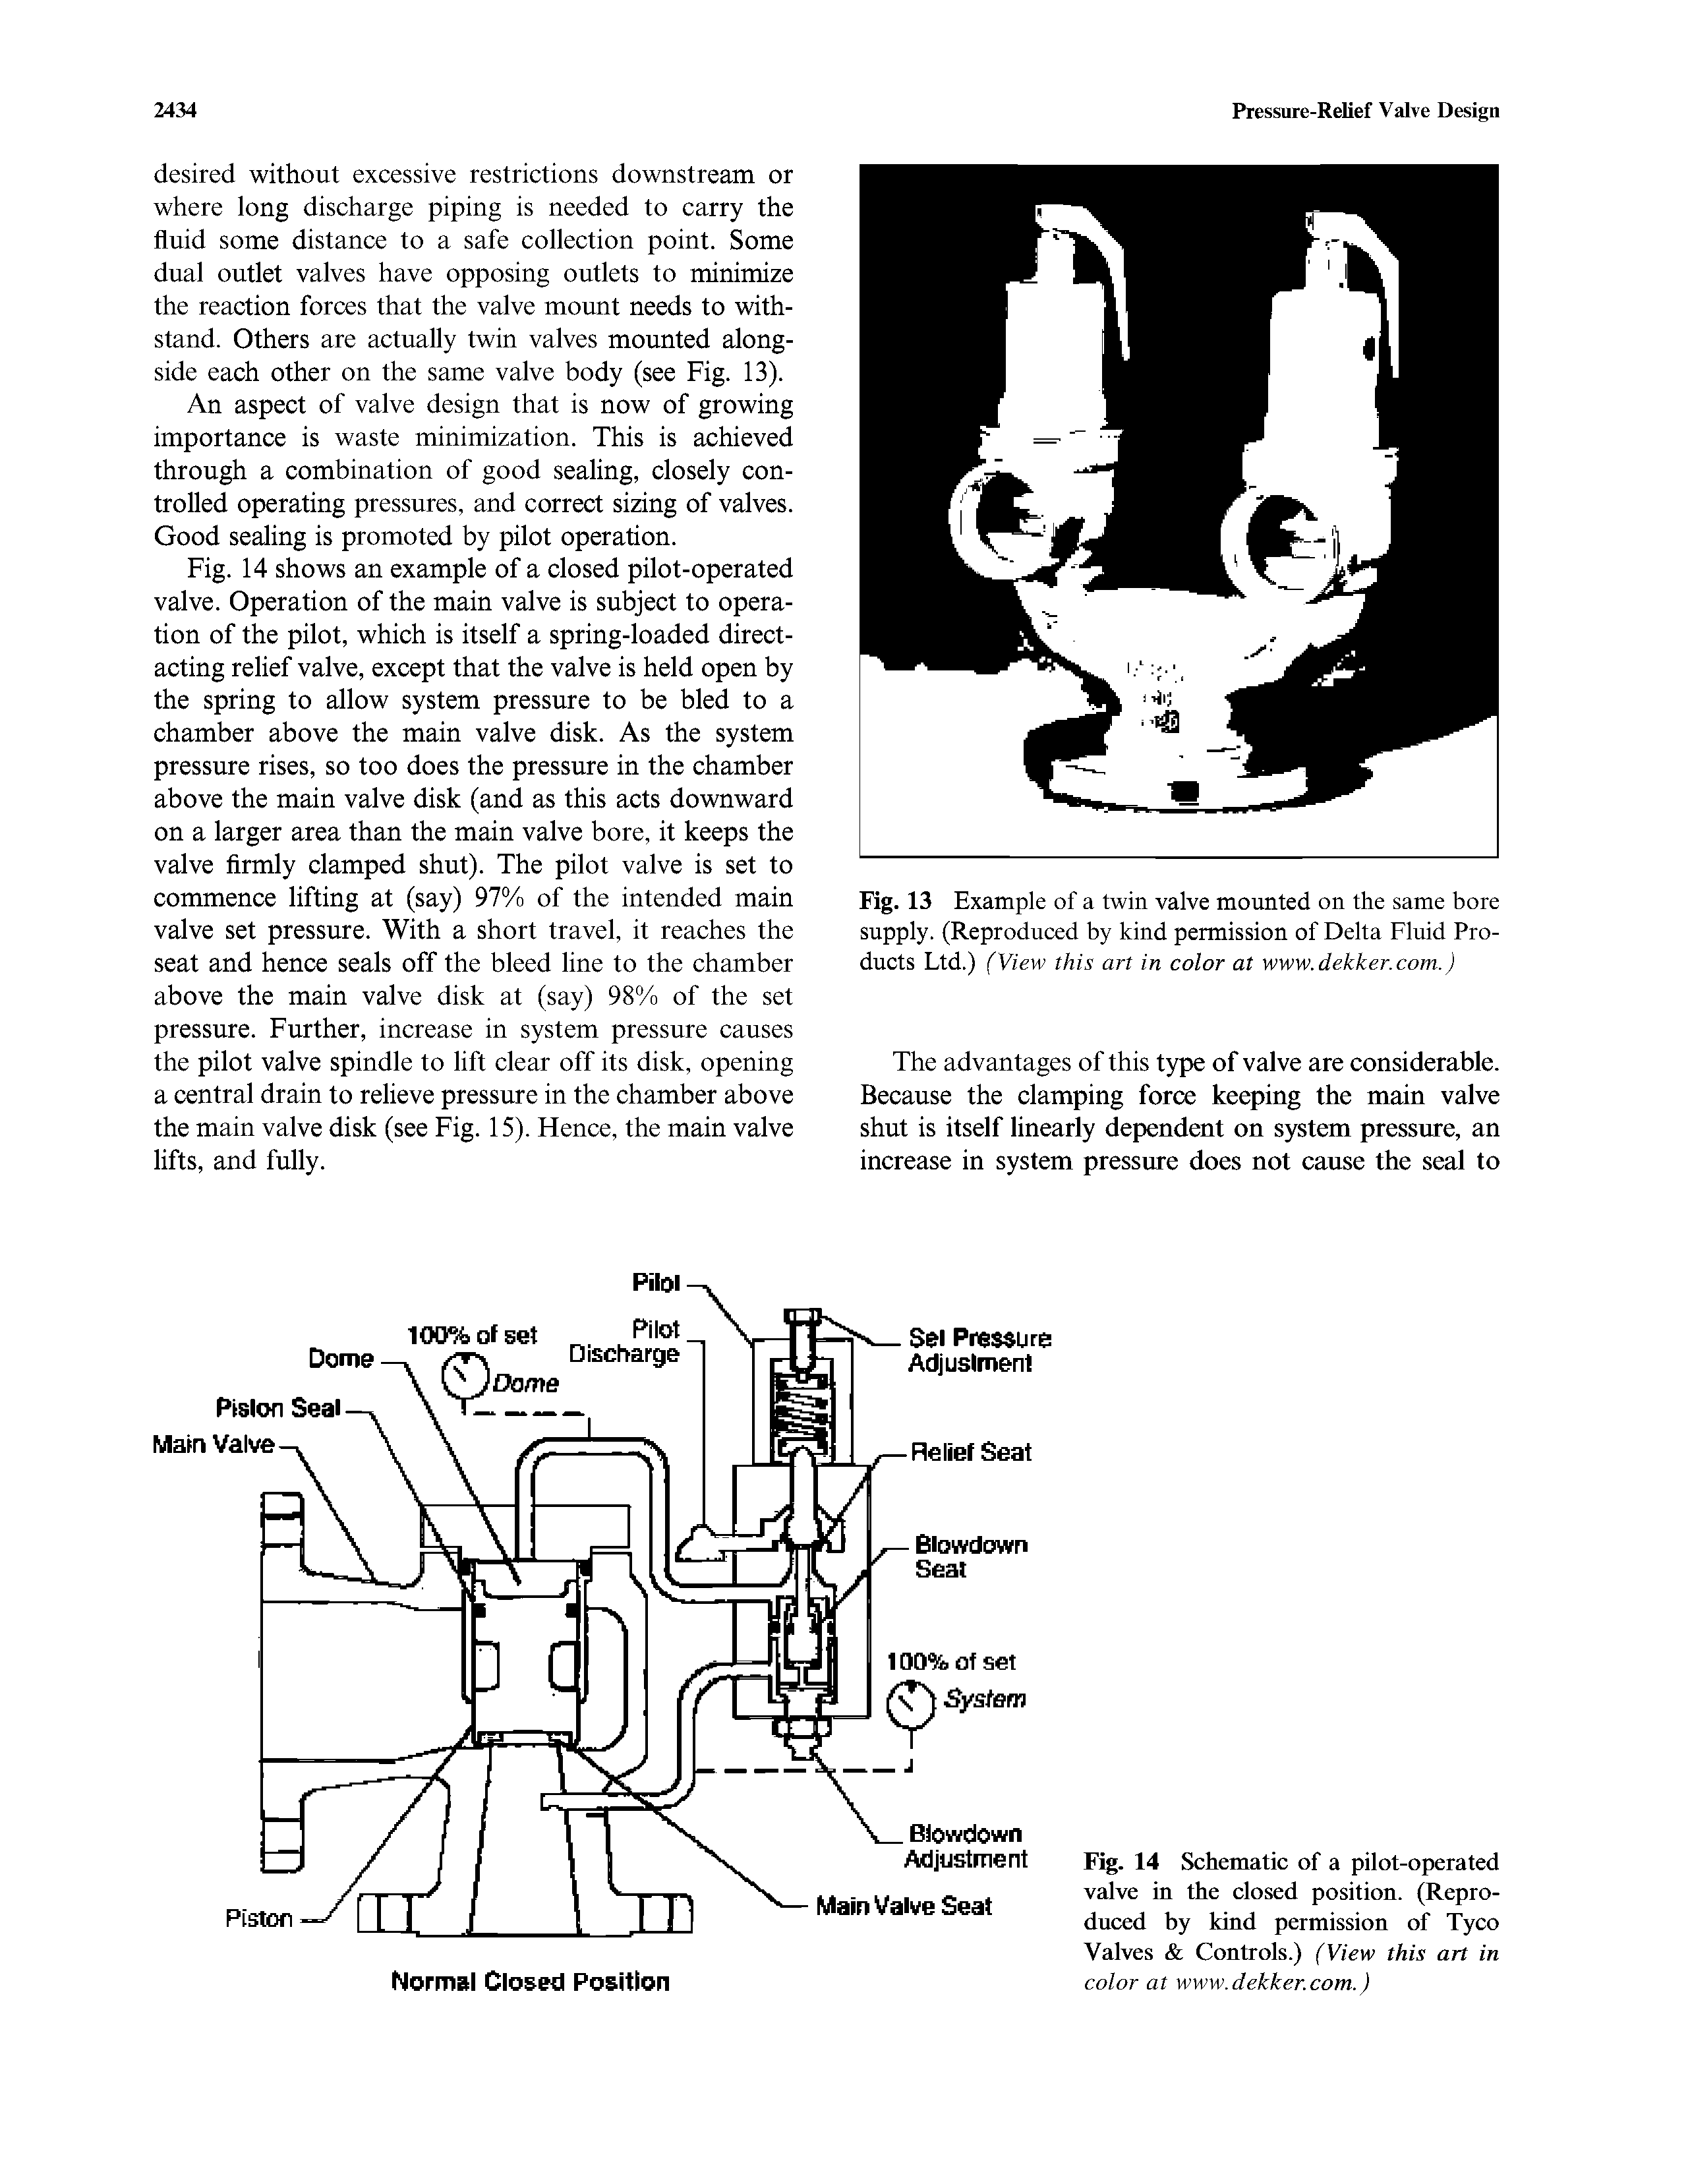 Fig. 14 Schematic of a pilot-operated valve in the closed position. (Reproduced by kind permission of Tyco Valves Controls.) (View this art in...